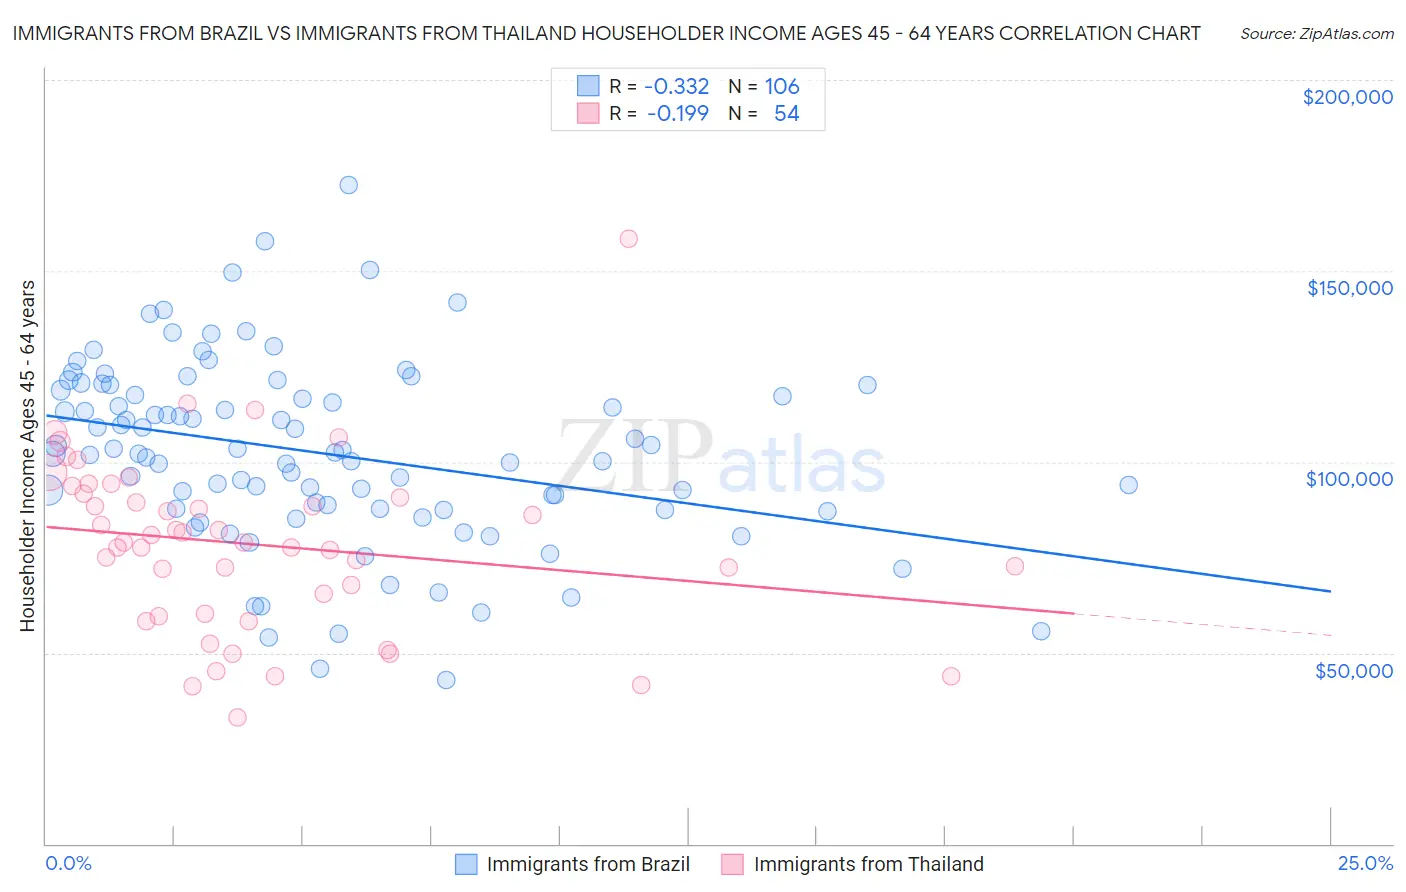 Immigrants from Brazil vs Immigrants from Thailand Householder Income Ages 45 - 64 years